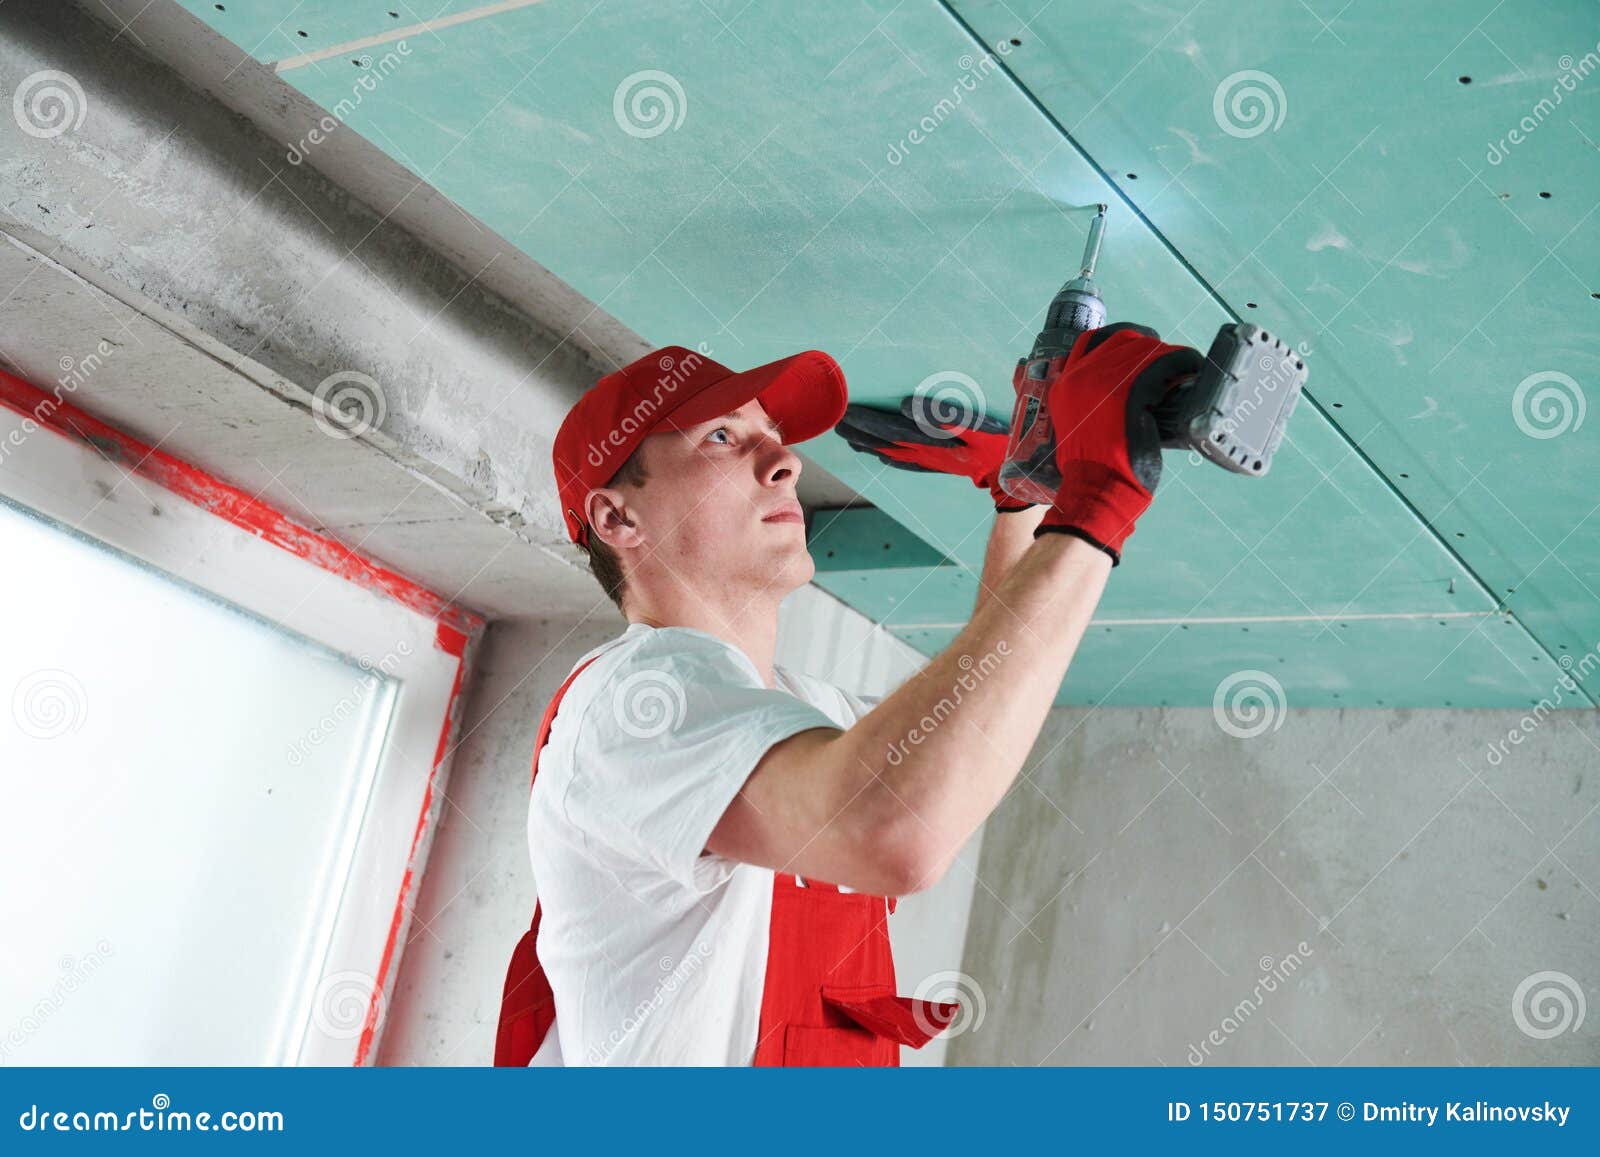 Gypsum Suspended Ceiling Construction Work Stock Image Image Of